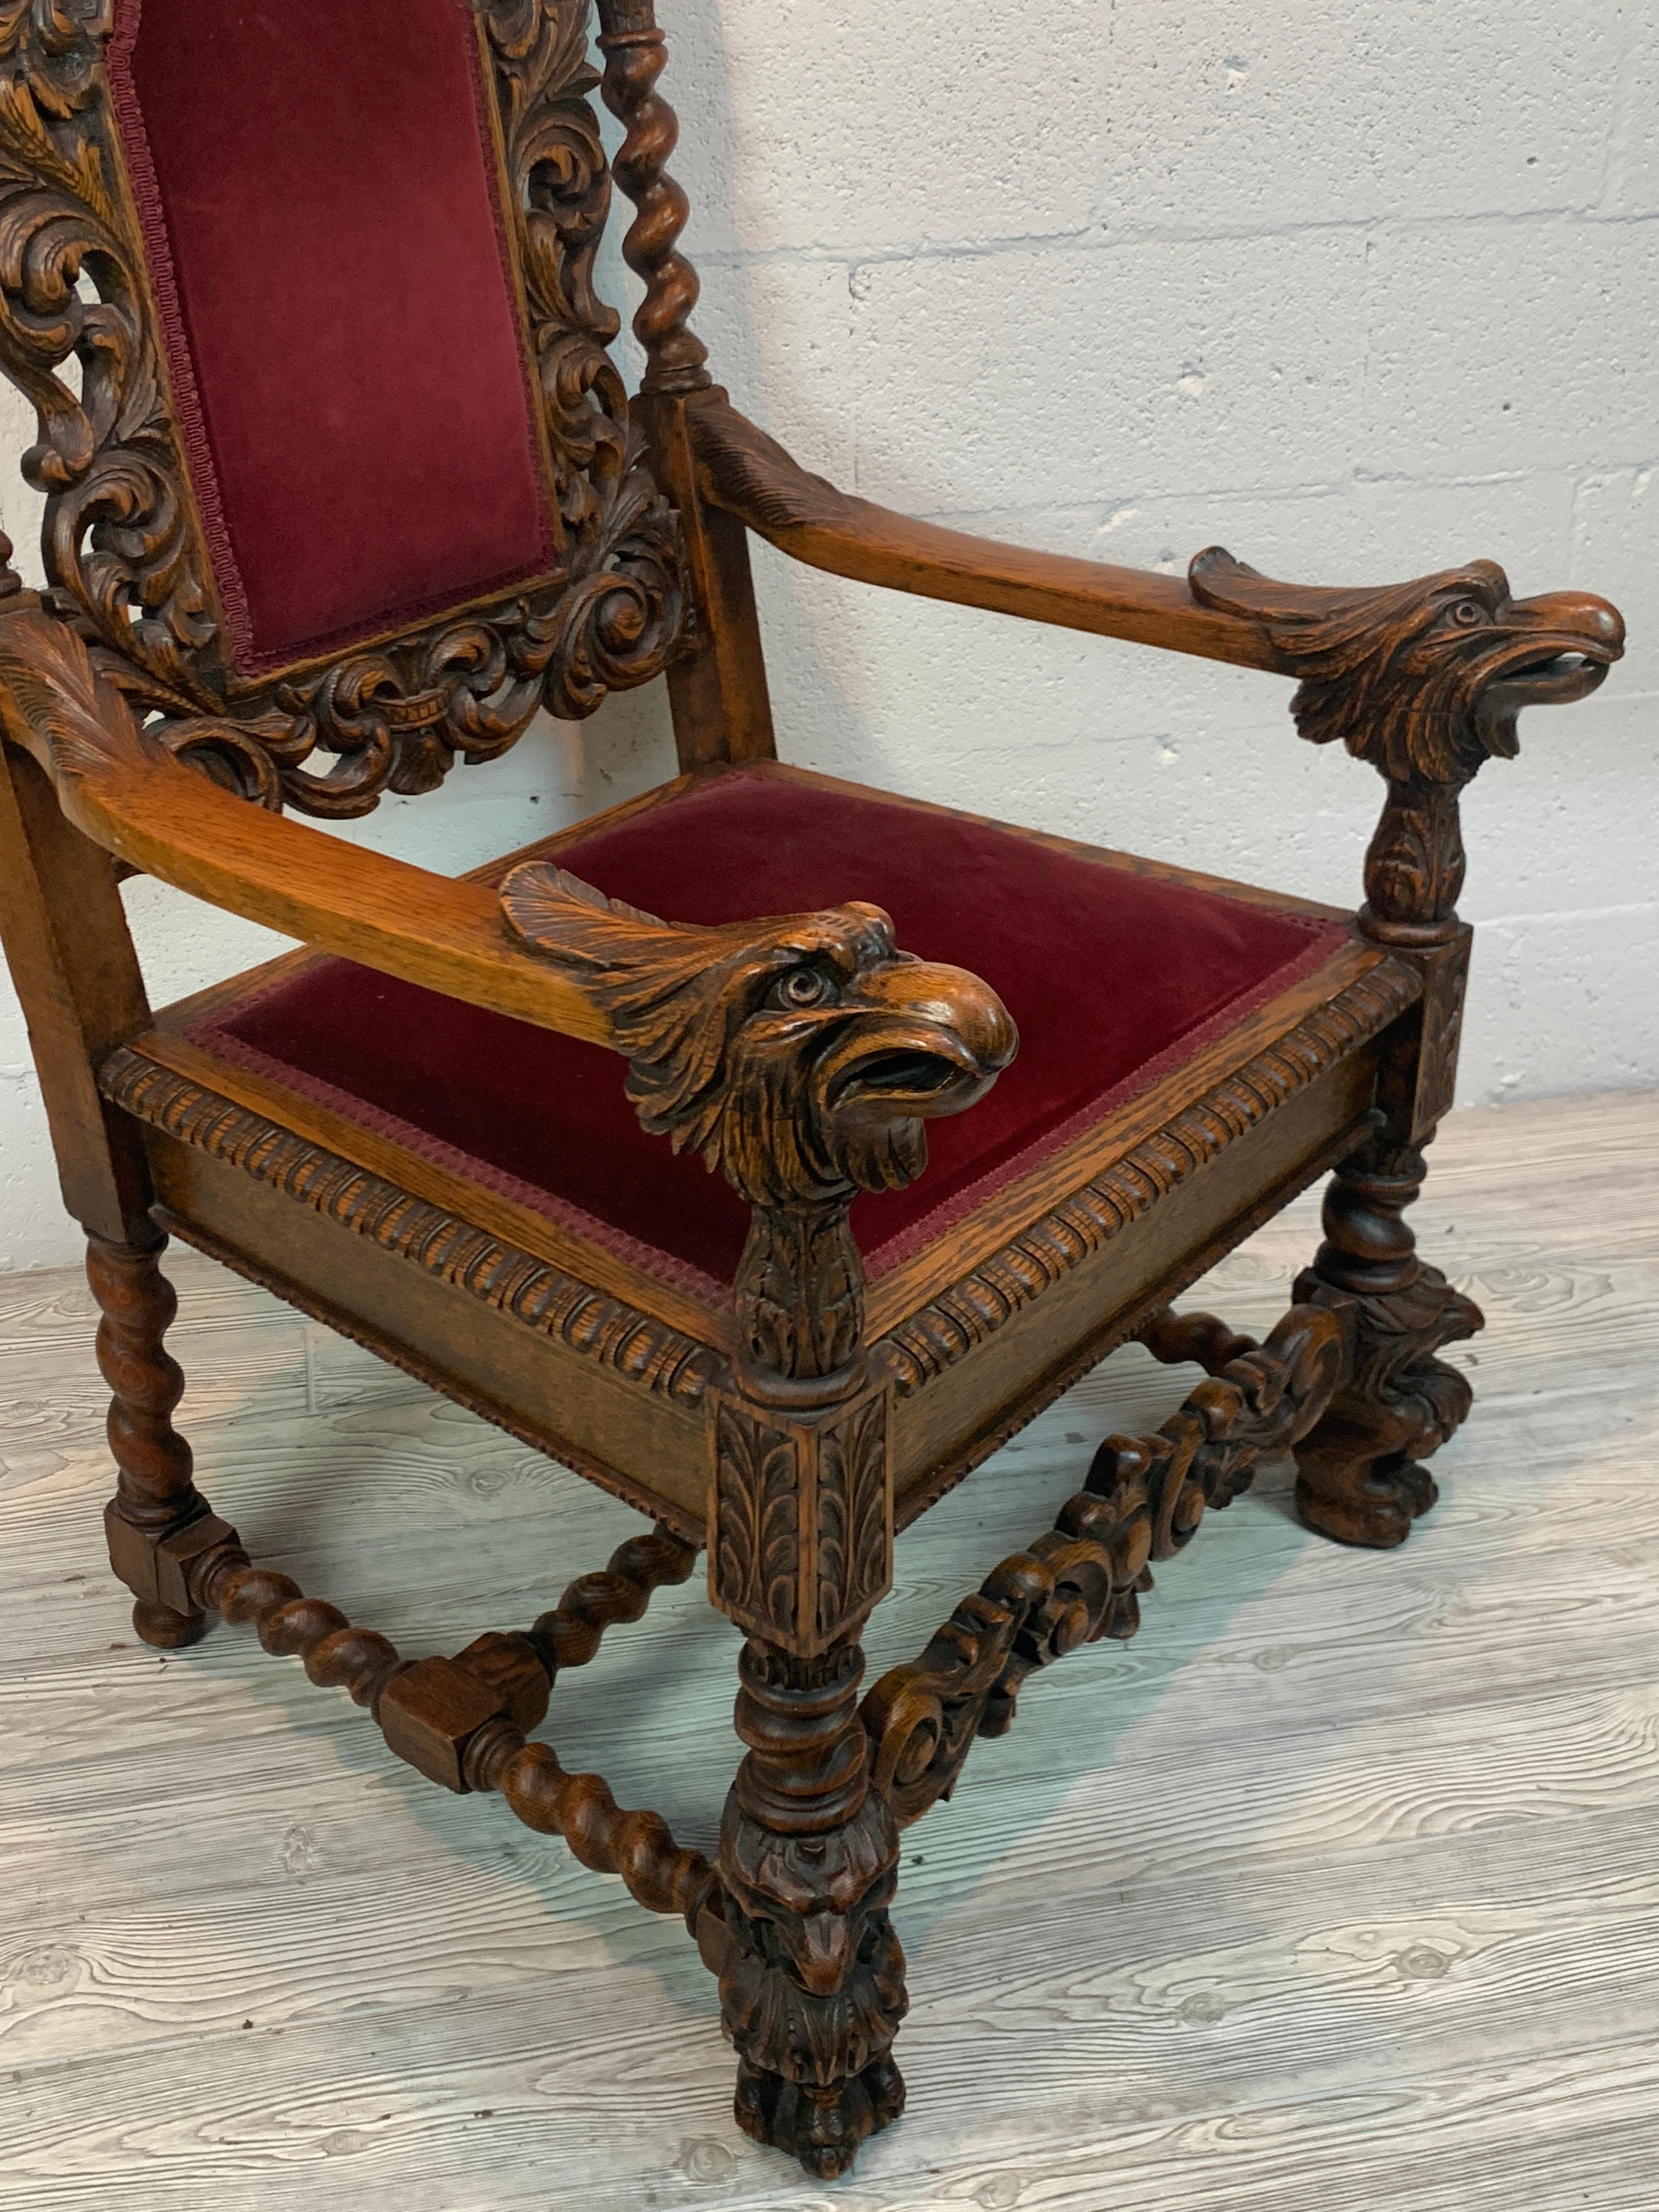 Hand-Carved Signed American Carved Oak Eagle Motif Throne Chair